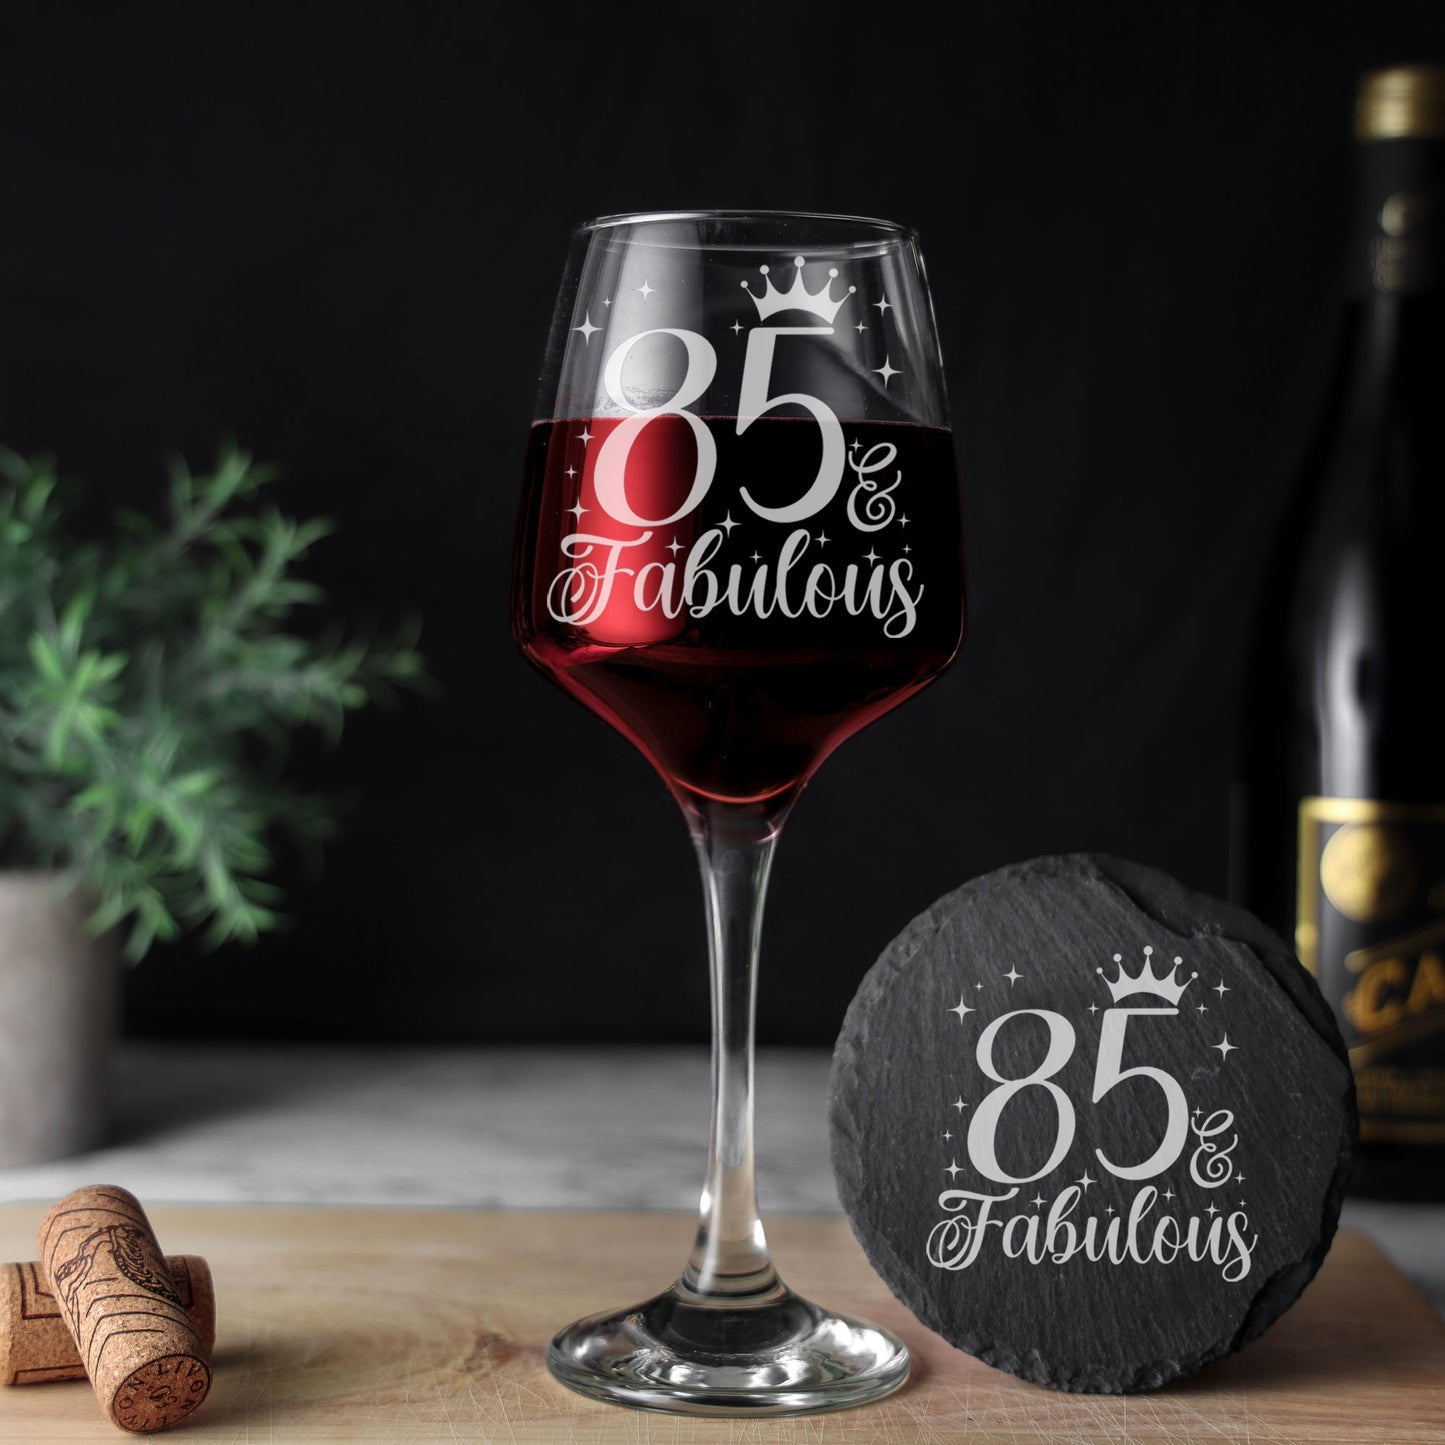 85 & Fabulous 85th Birthday Gift Engraved Wine Glass and/or Coaster Set  - Always Looking Good - Glass & Round Coaster  